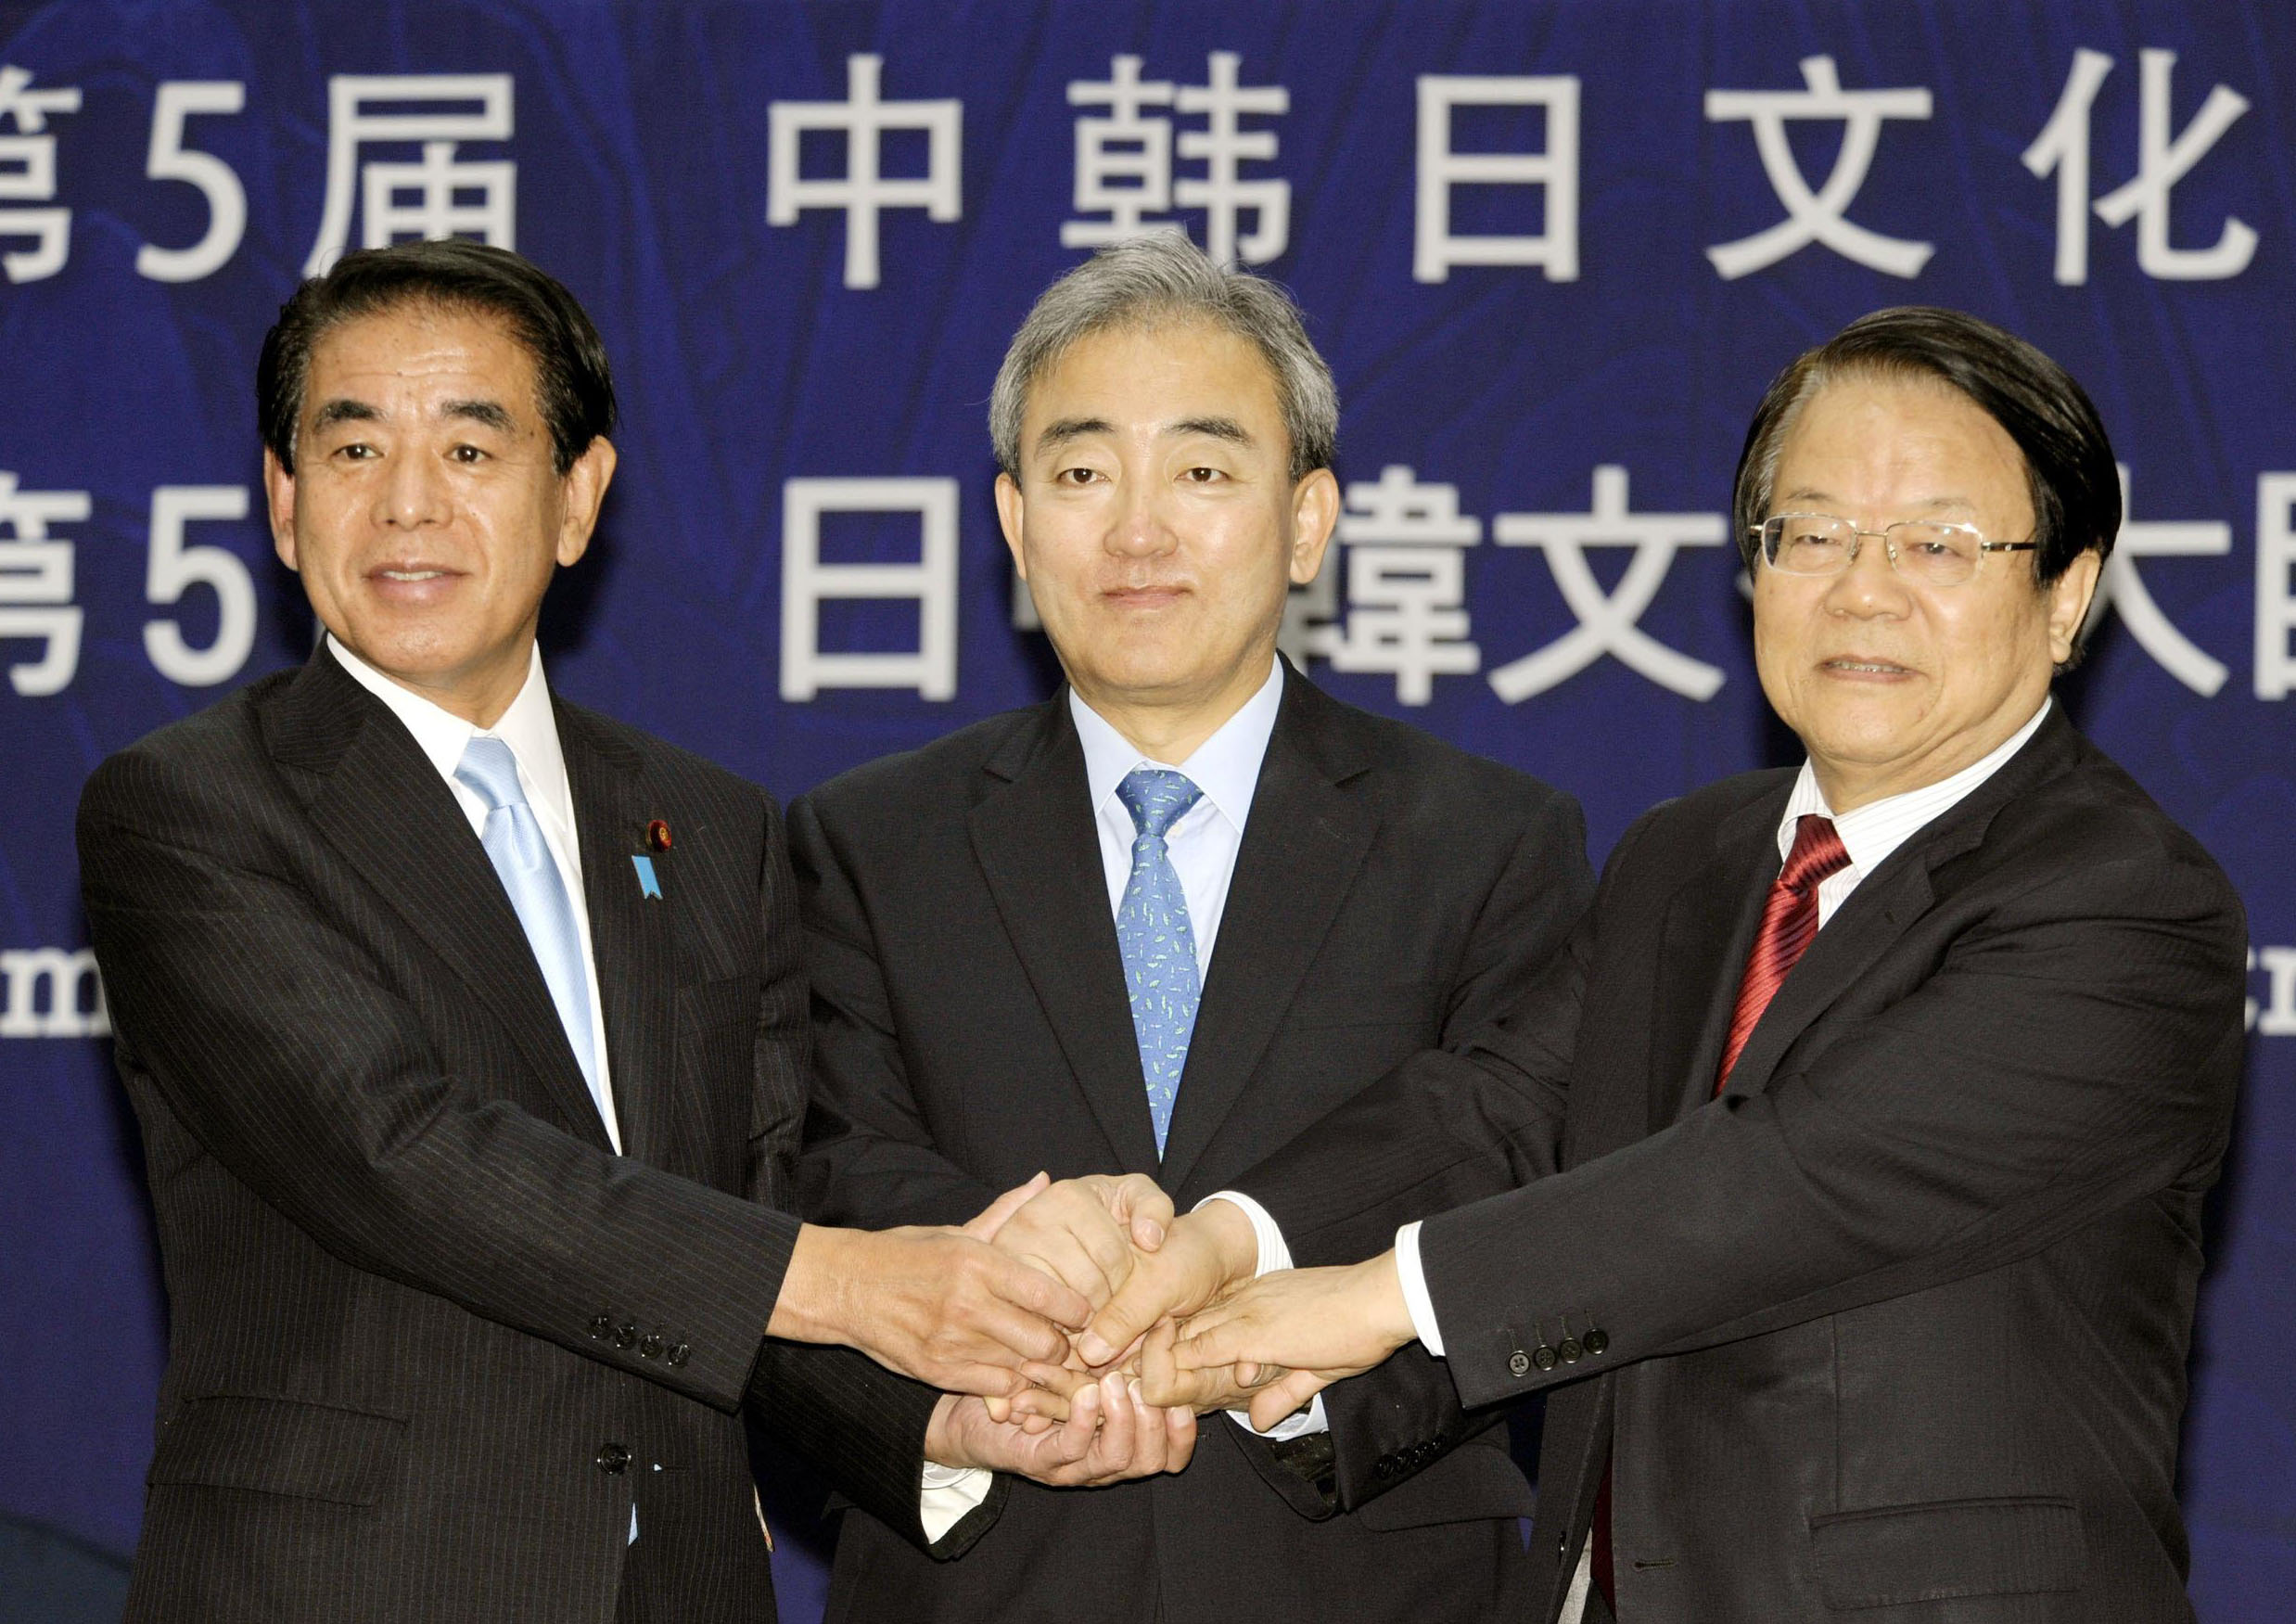 Cultured bunch: Culture minister Hakubun Shimomura (left) and his South Korean and Chinese counterparts, Yoo Jin-ryong (center) and Cai Wu, pose for a group photo after their trilateral meeting in Gwangju, South Korea, on Saturday. The three sides designated one city in each country as an East Asia City of Culture to further exchanges and mutual understanding next year. | KYODO